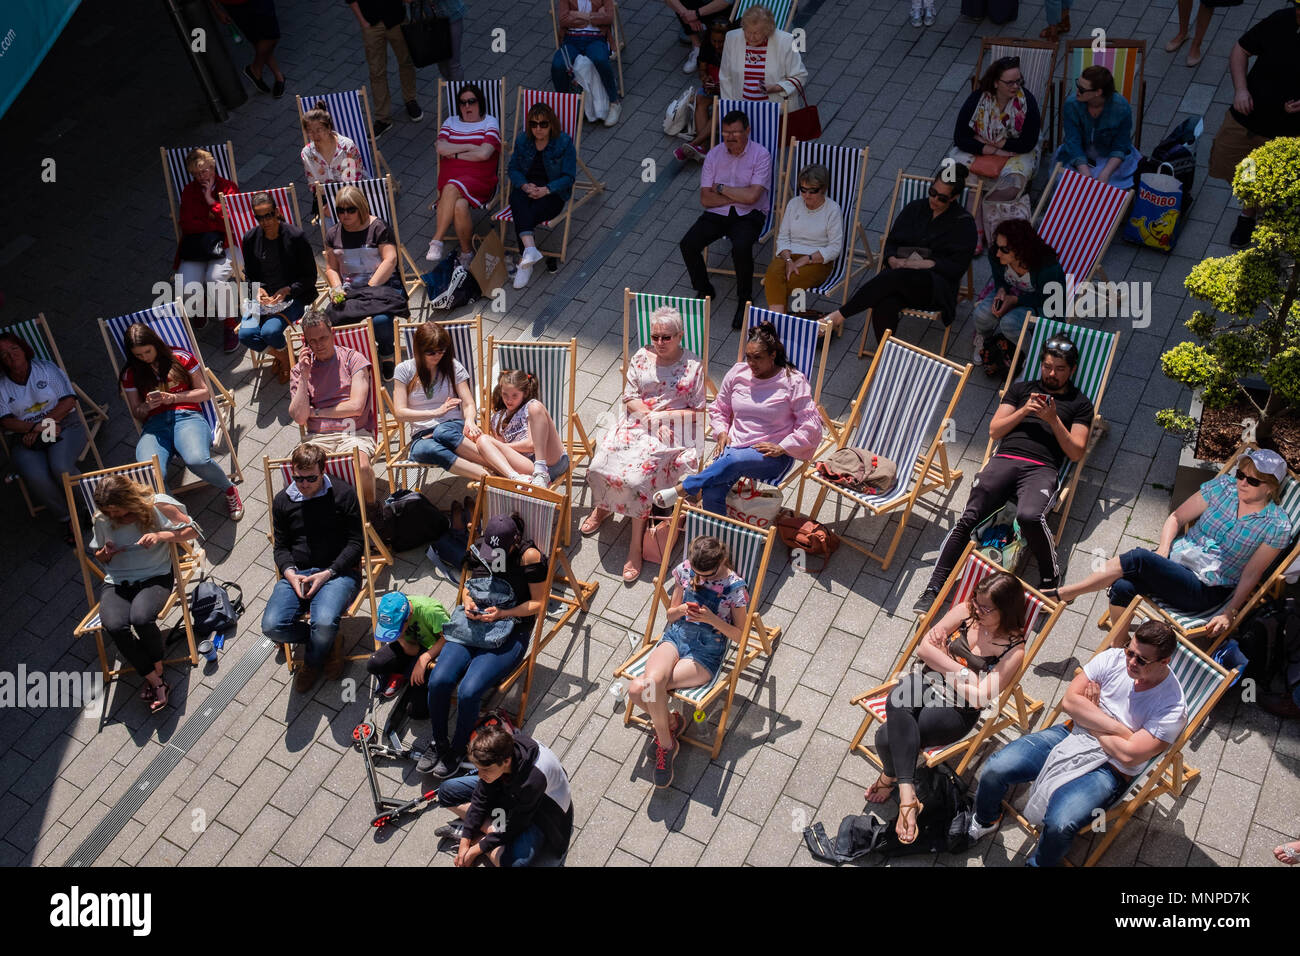 London, England, 19th May 2018.  A crowd is seated on deckchairs watching the Royal Wedding on a big screen at the LDO in Wembley Park © Tim Ring/Alamy Live News Stock Photo